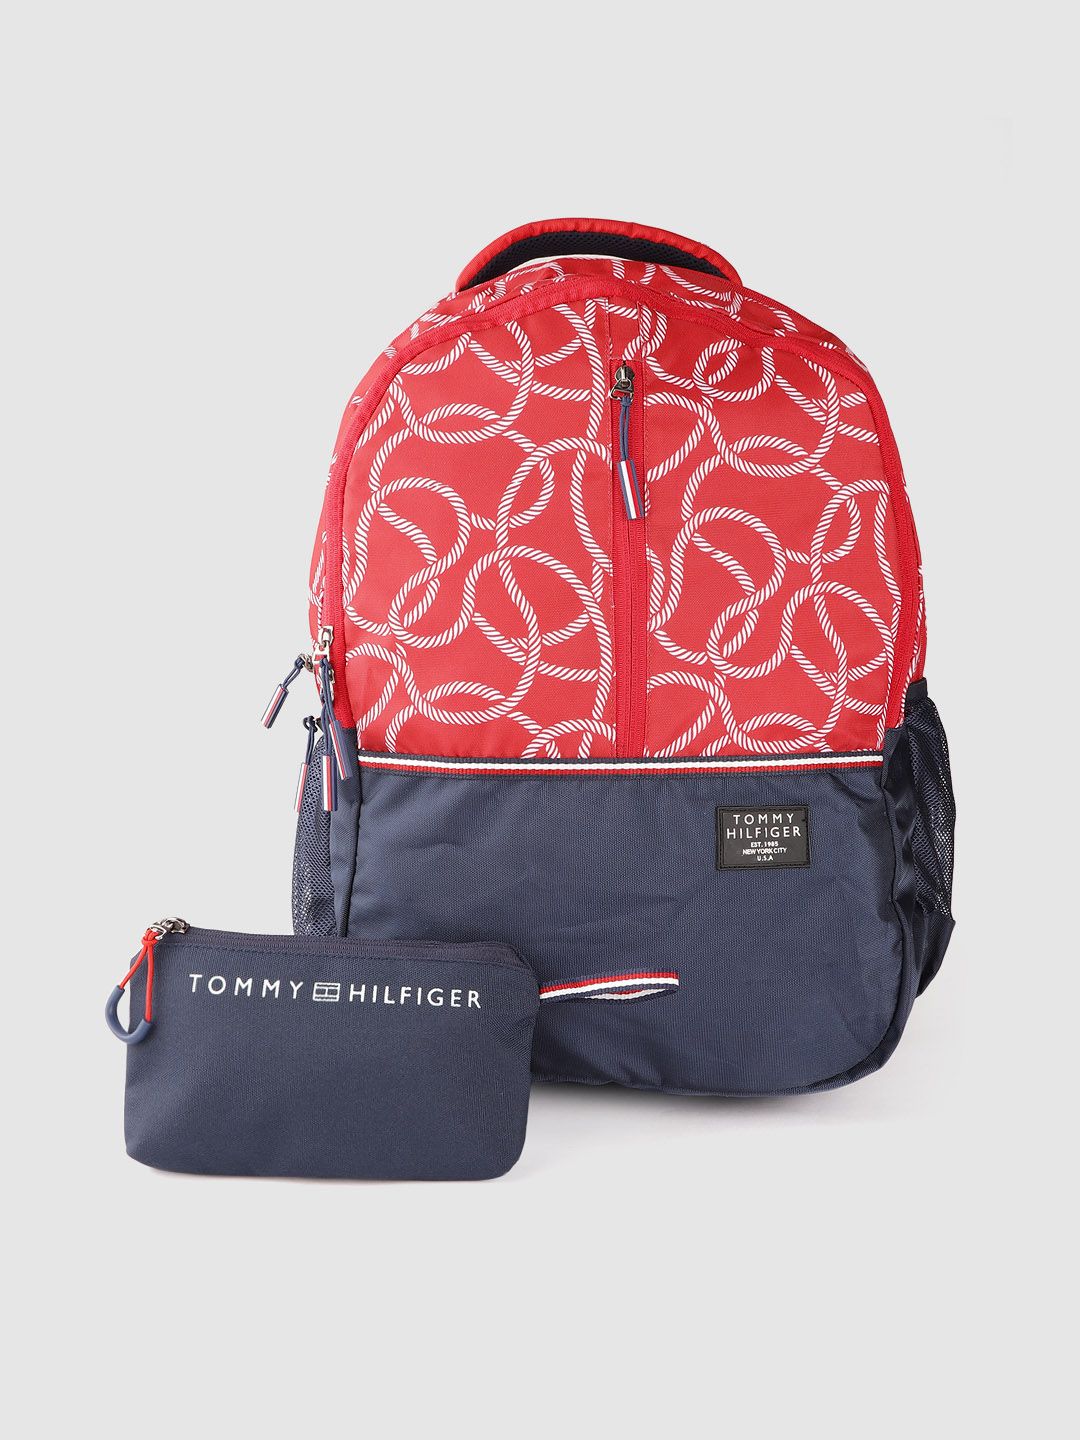 Tommy Hilfiger Unisex Red & White Abstract Print Backpack with Rain Cover & Pouch 44L Price in India